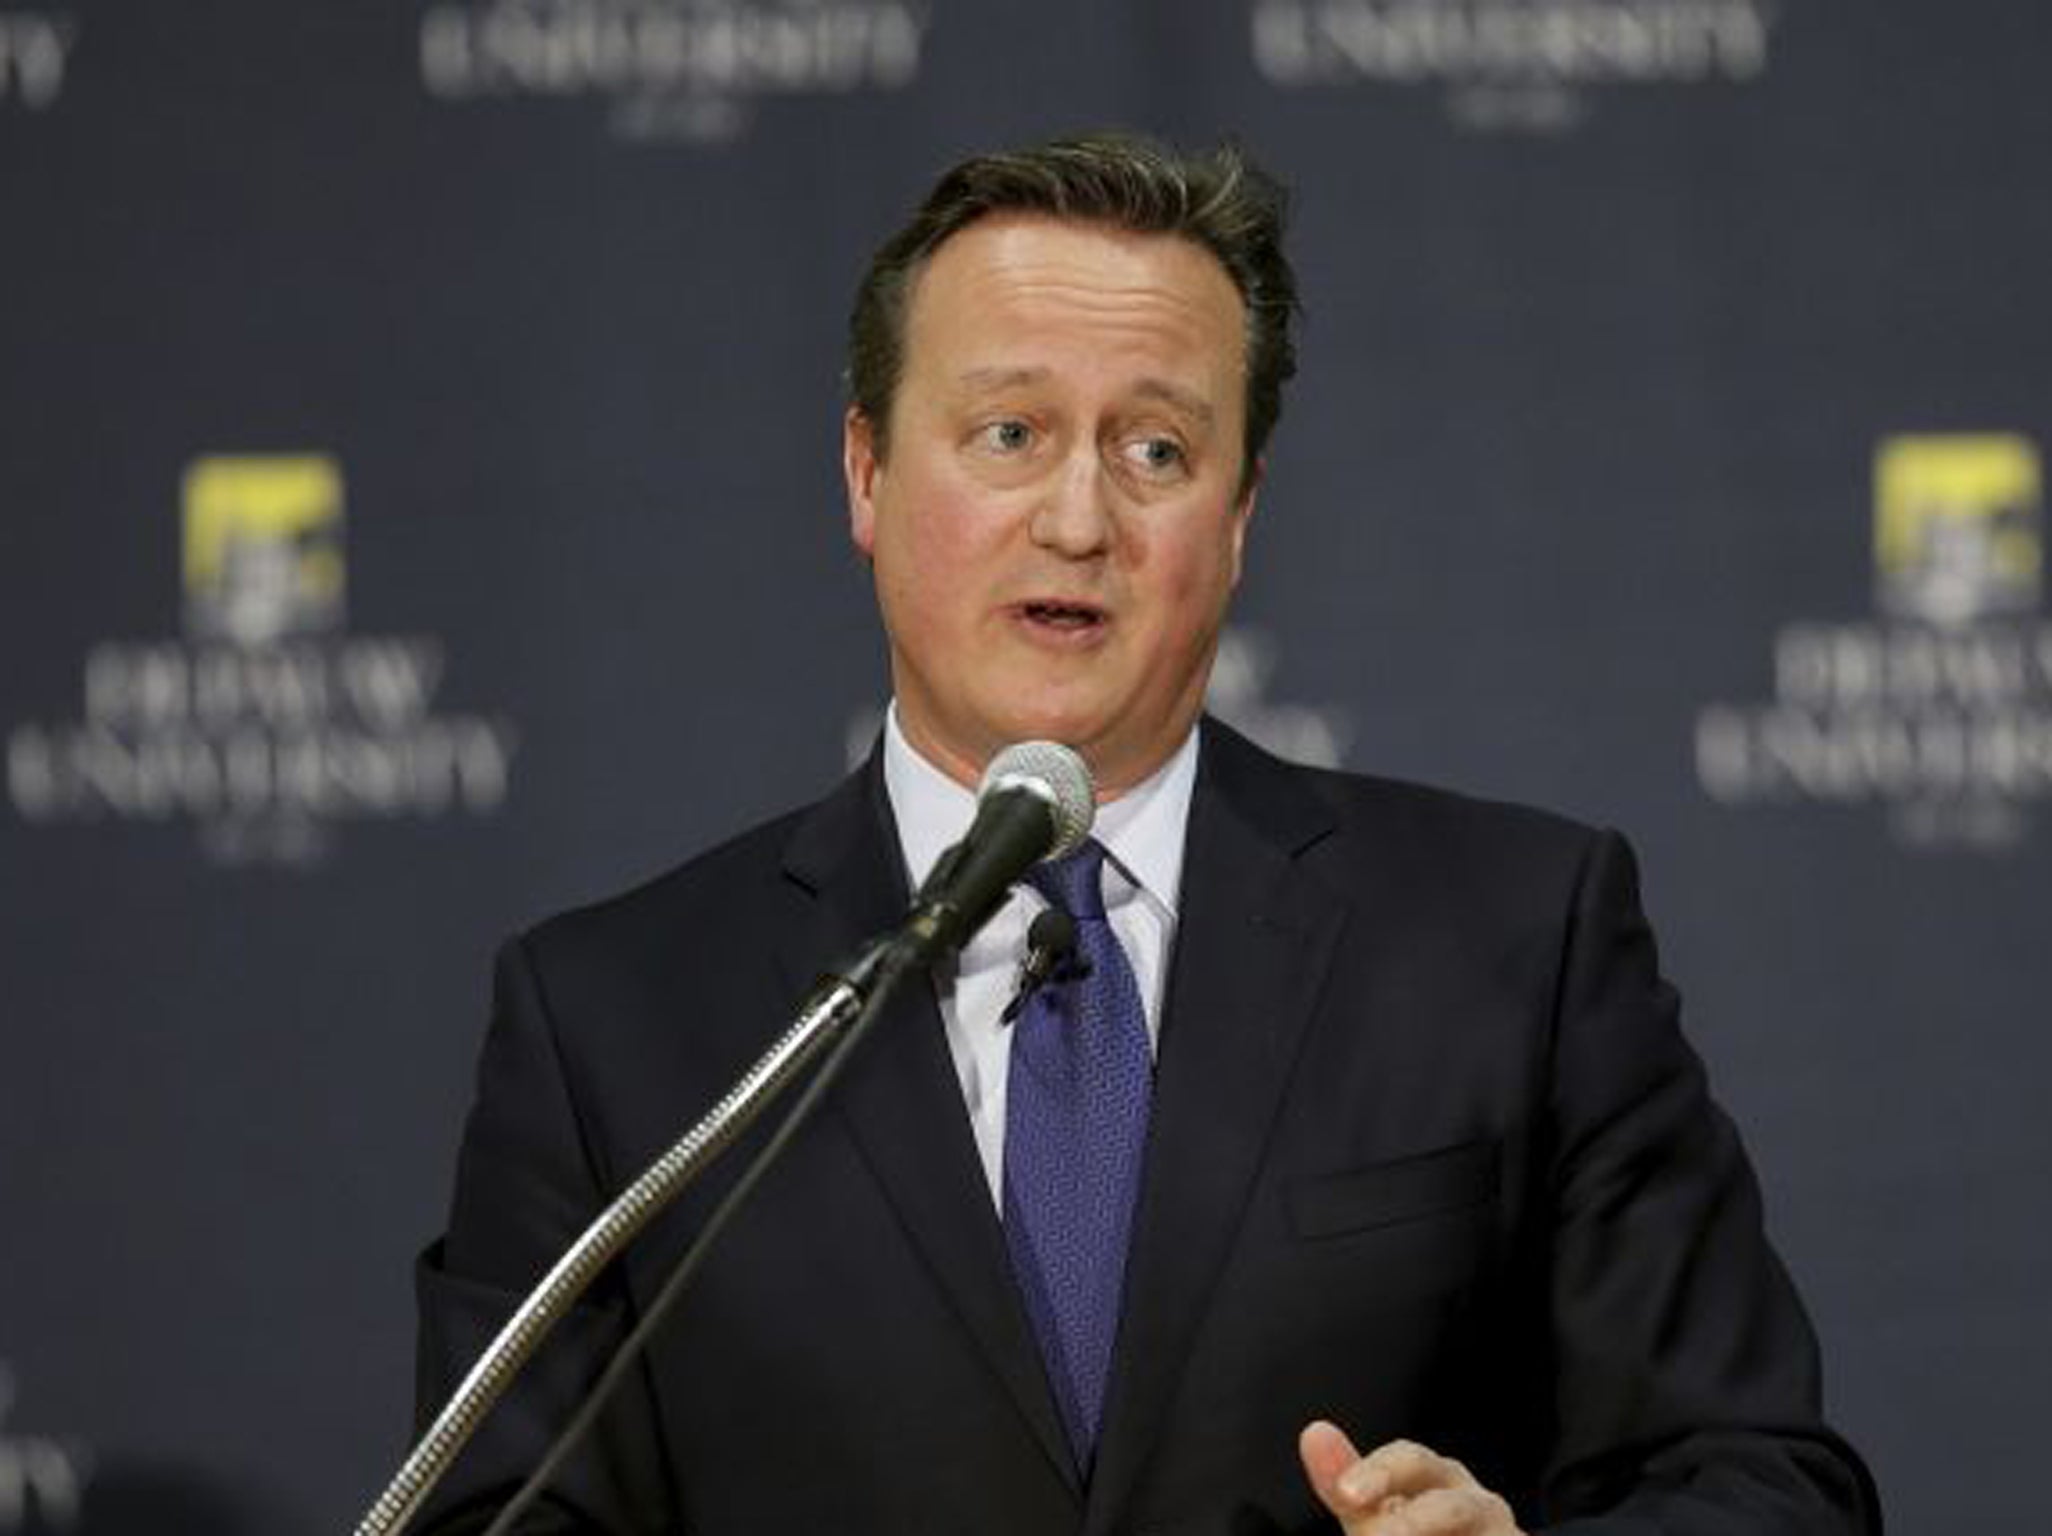 David Cameron was paid £120,000 for his recent hour long speech at DePauw University in Indiana